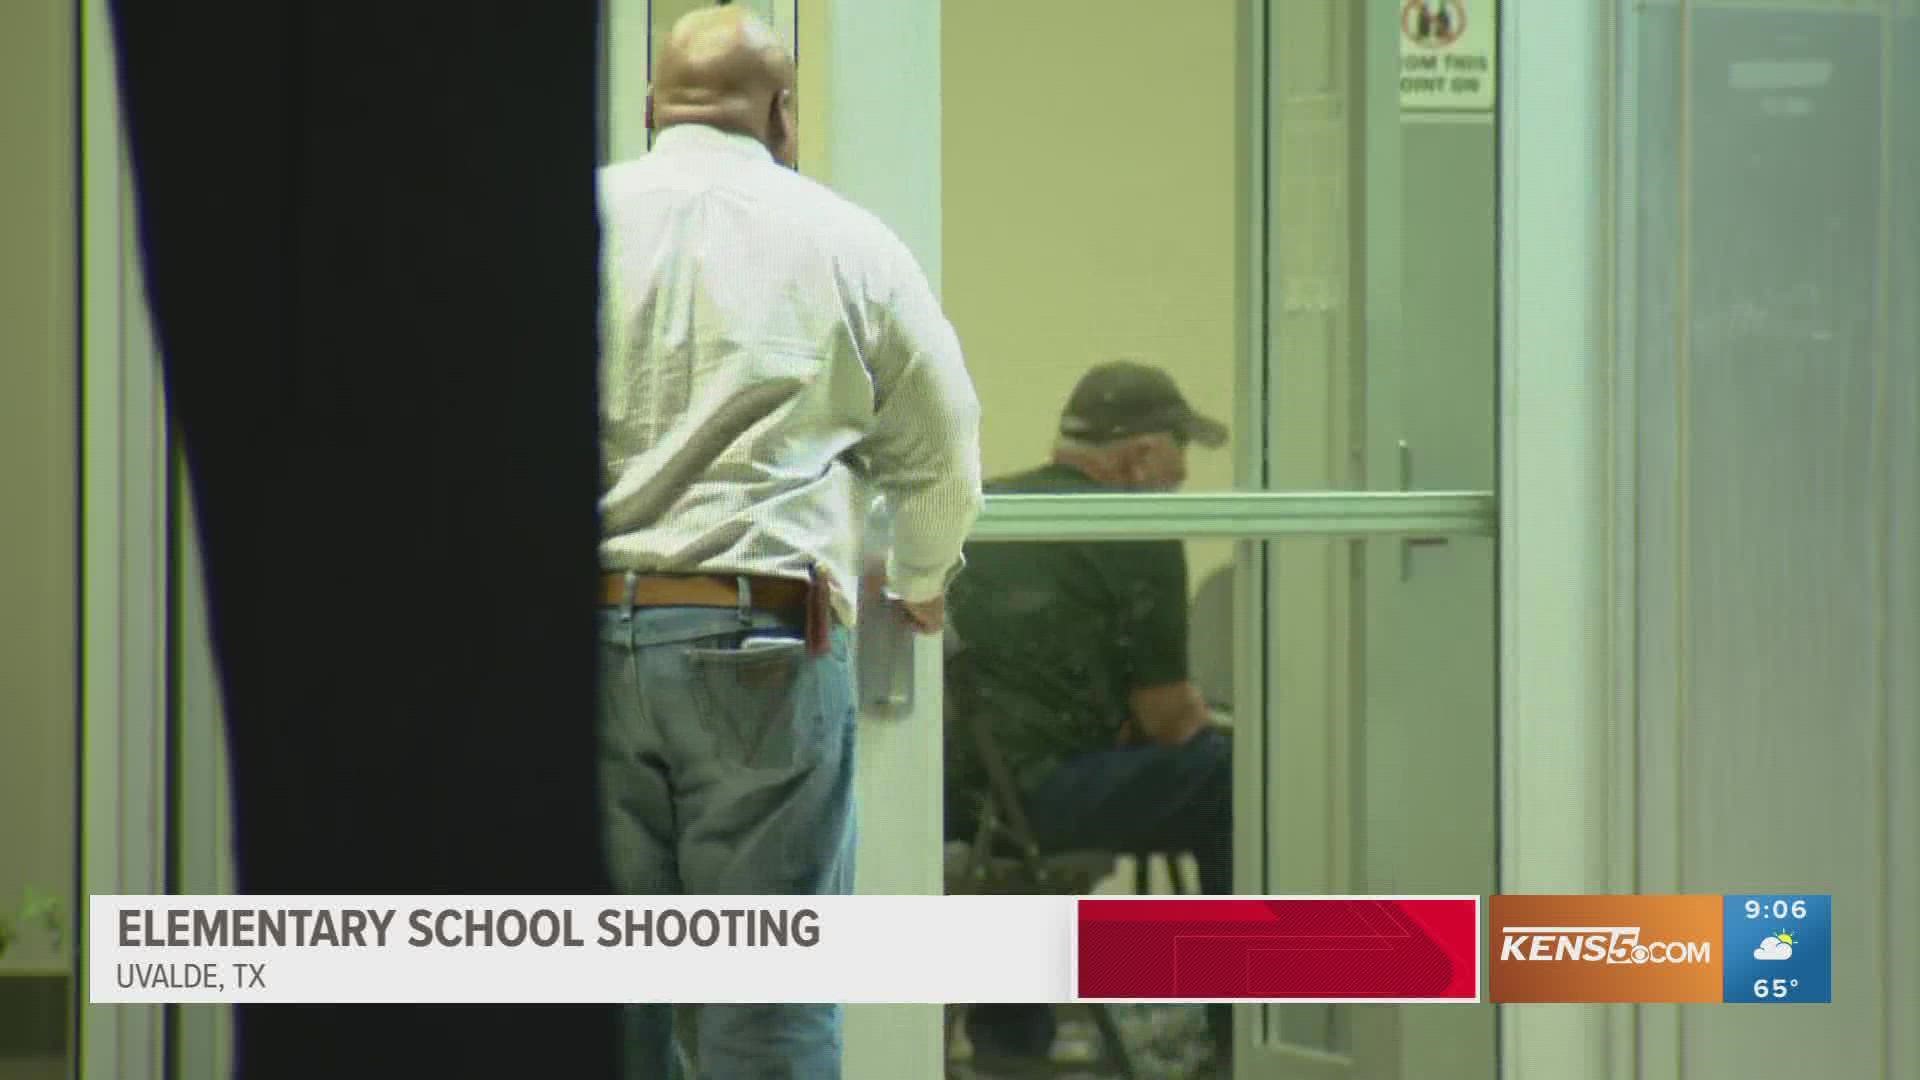 Some parents are still waiting to hear the specifics on what happened to their children following the deadly shooting at an elementary school in Uvalde.